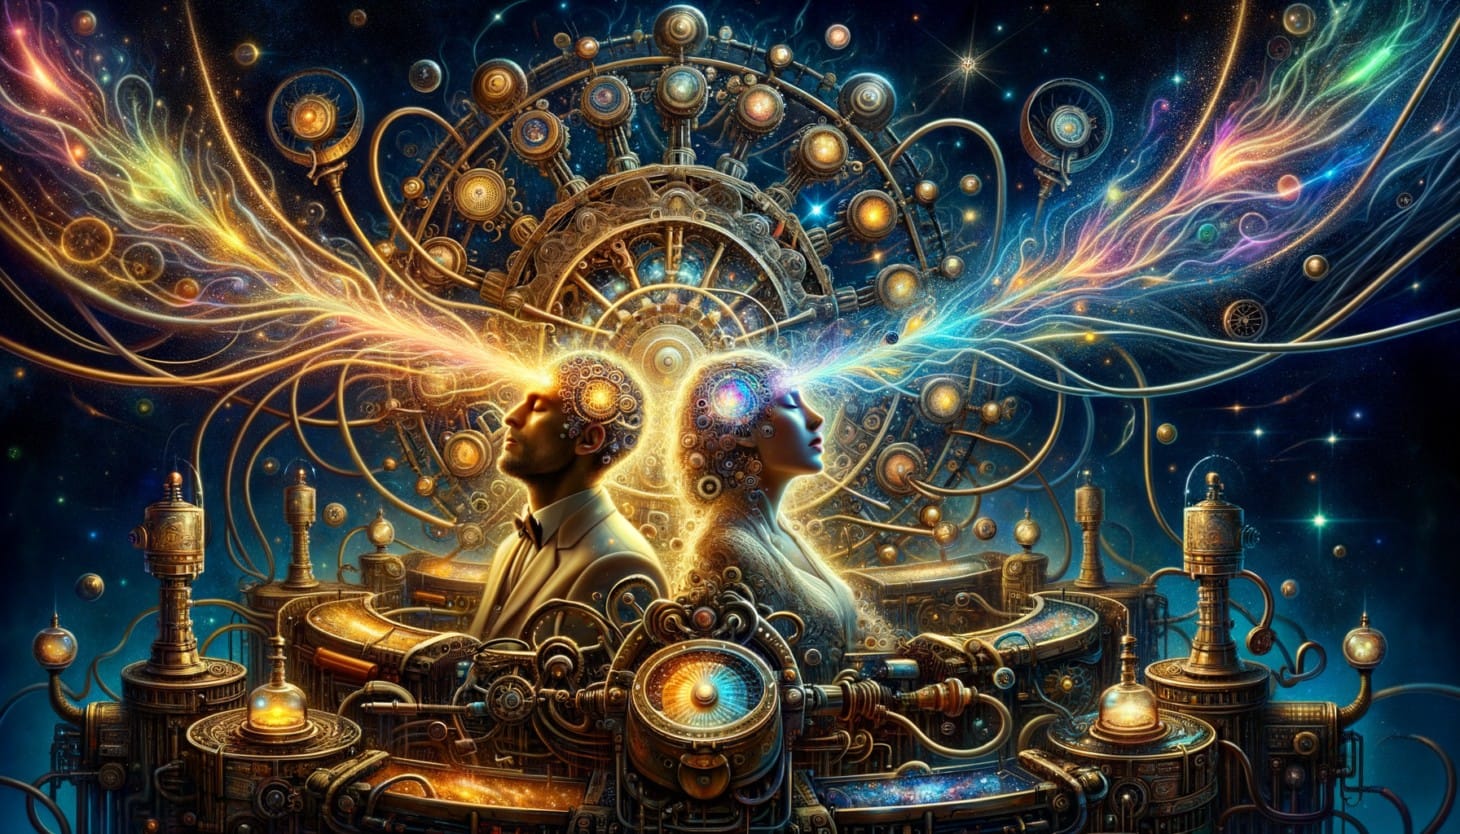 Two futuristic humans sit in a huge mechanical contraption and burst with colourful light as they share consciousness.